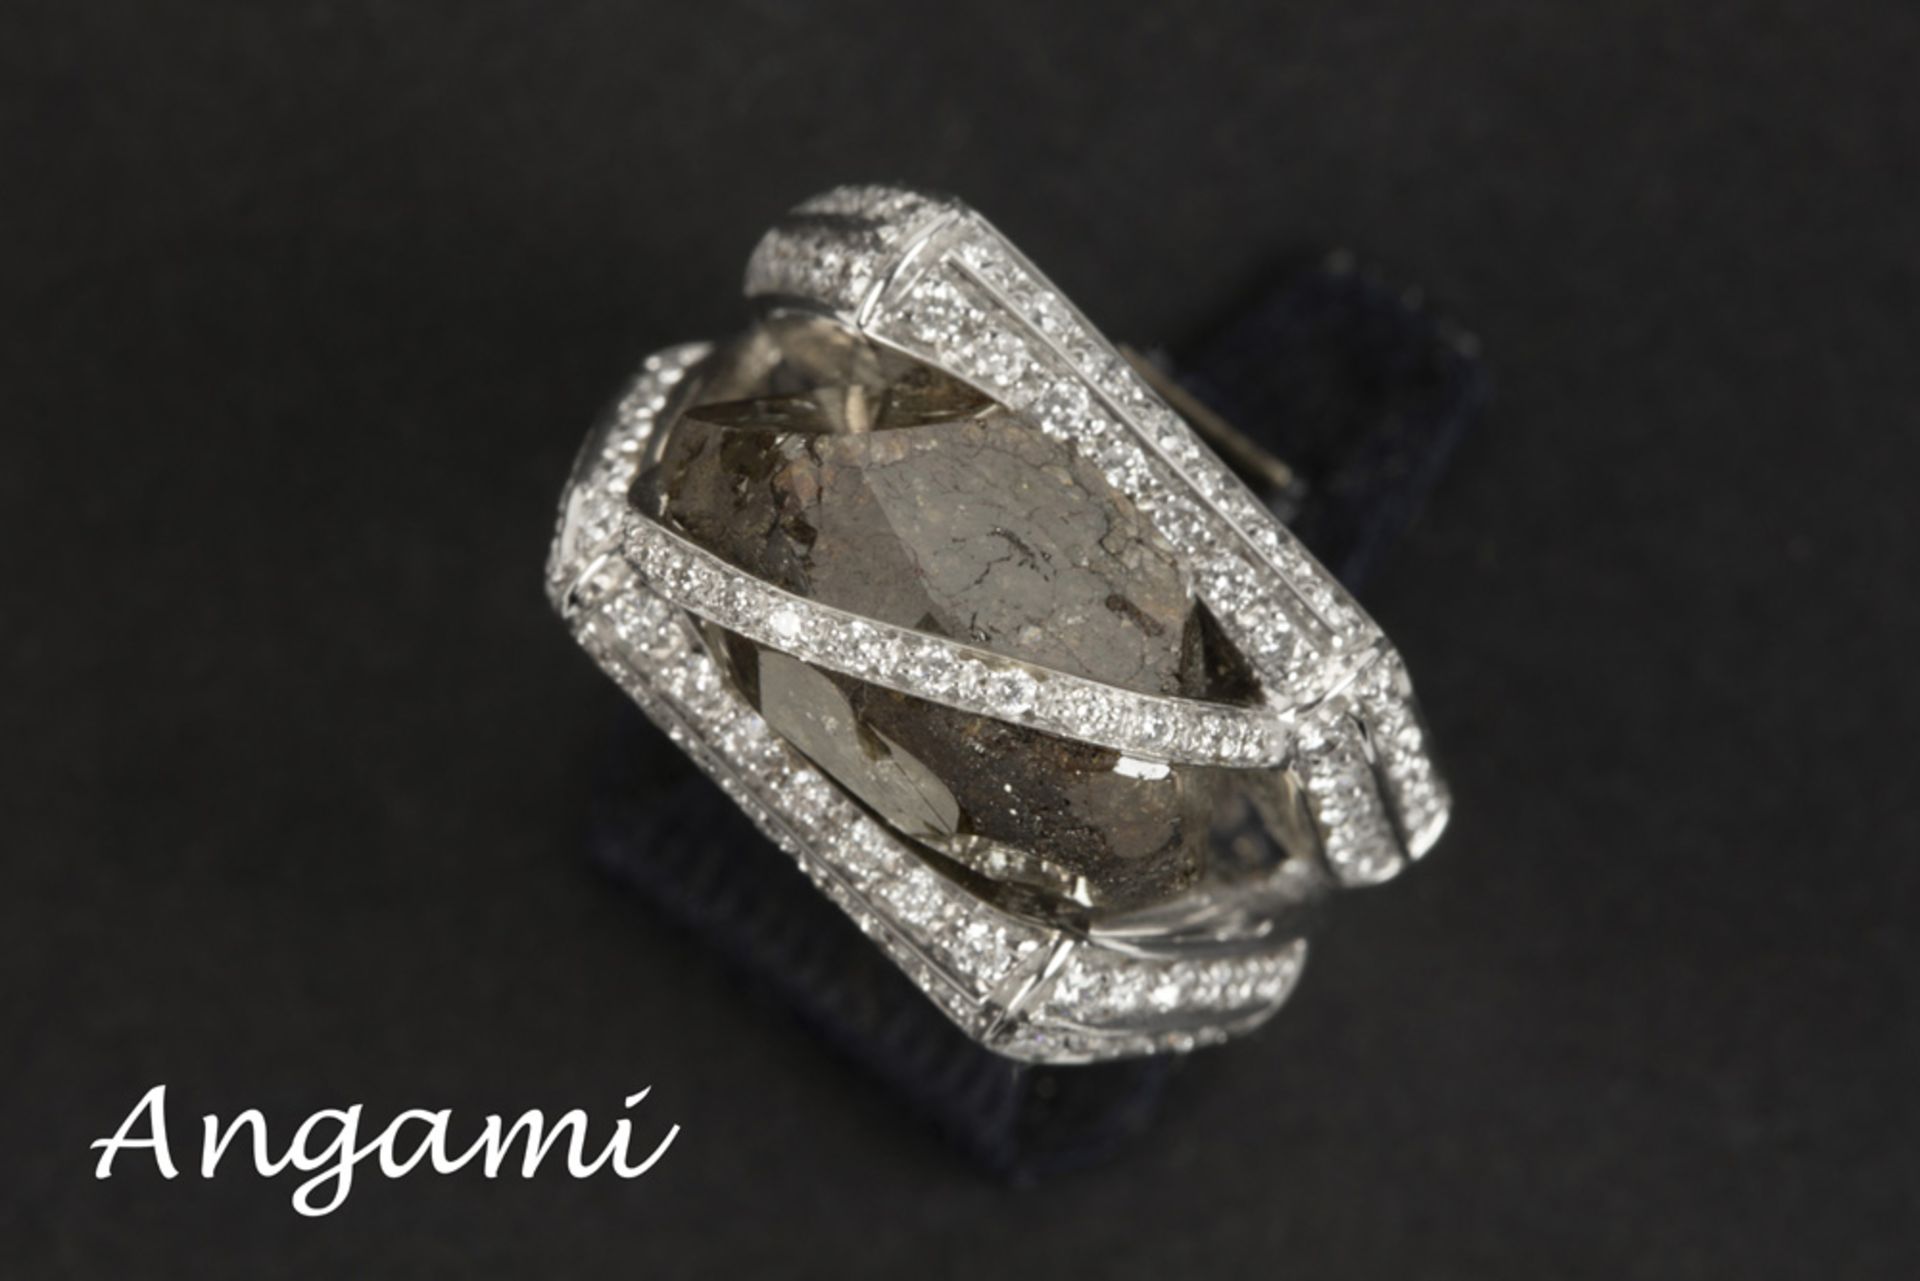 Italian AnGami signed ring with a special design in white gold (18 carat) with a ca 22 carat diamond